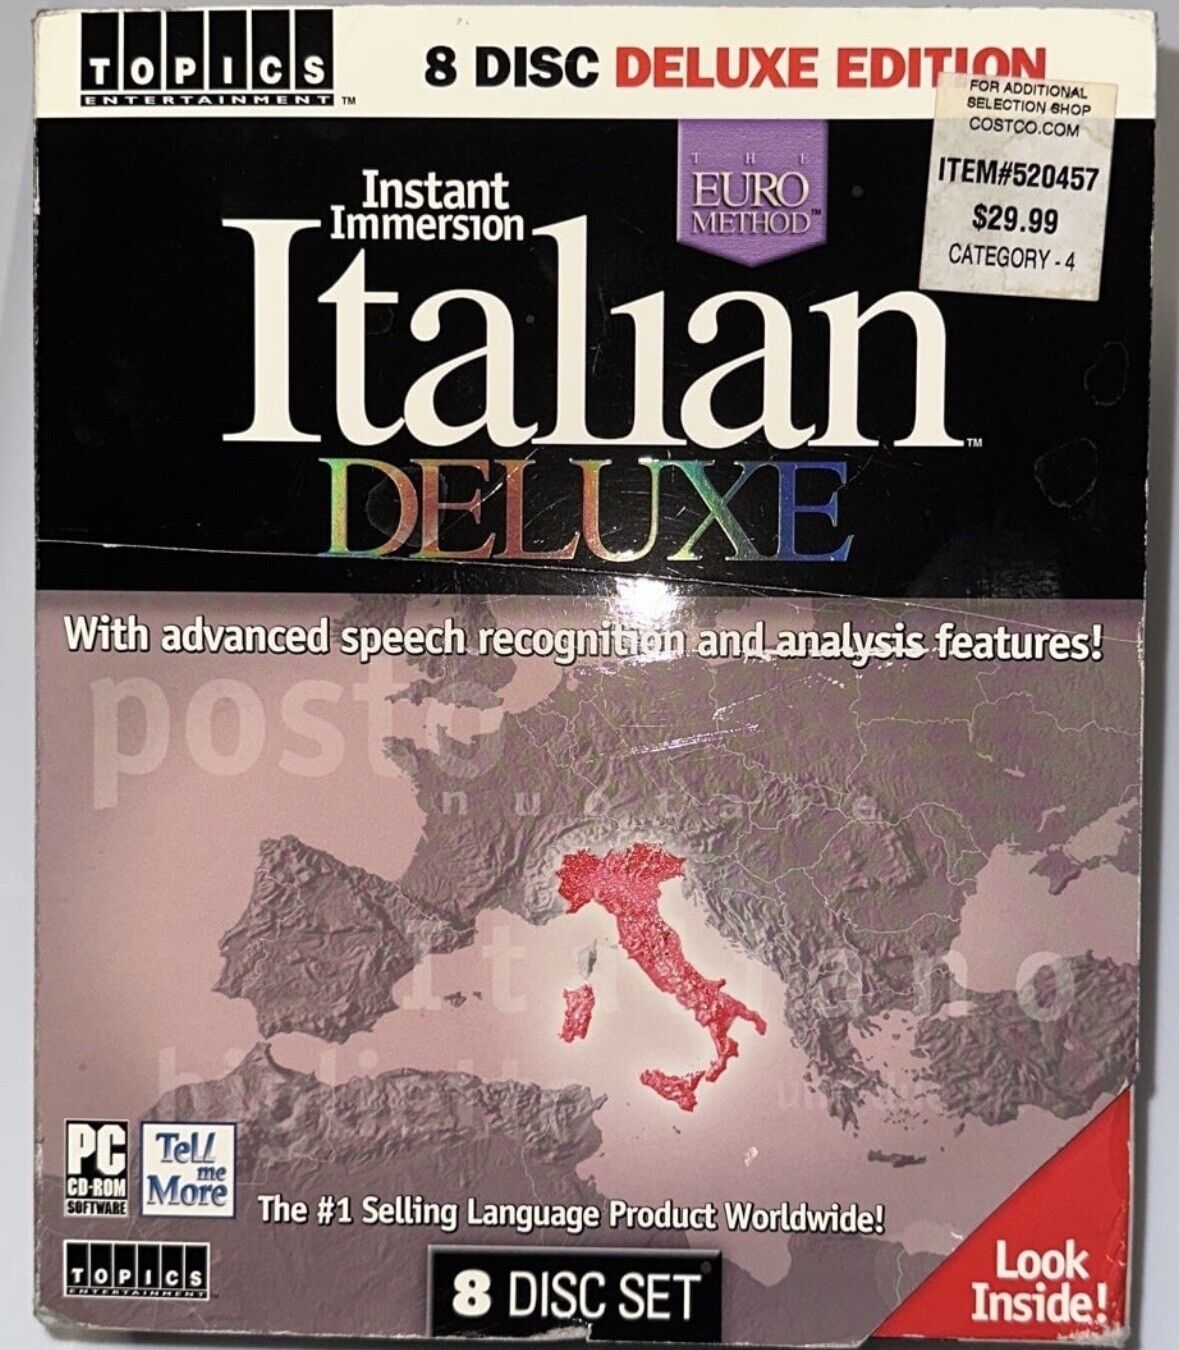 Instant Immersion Italian 8 disc deluxe edition – 2003